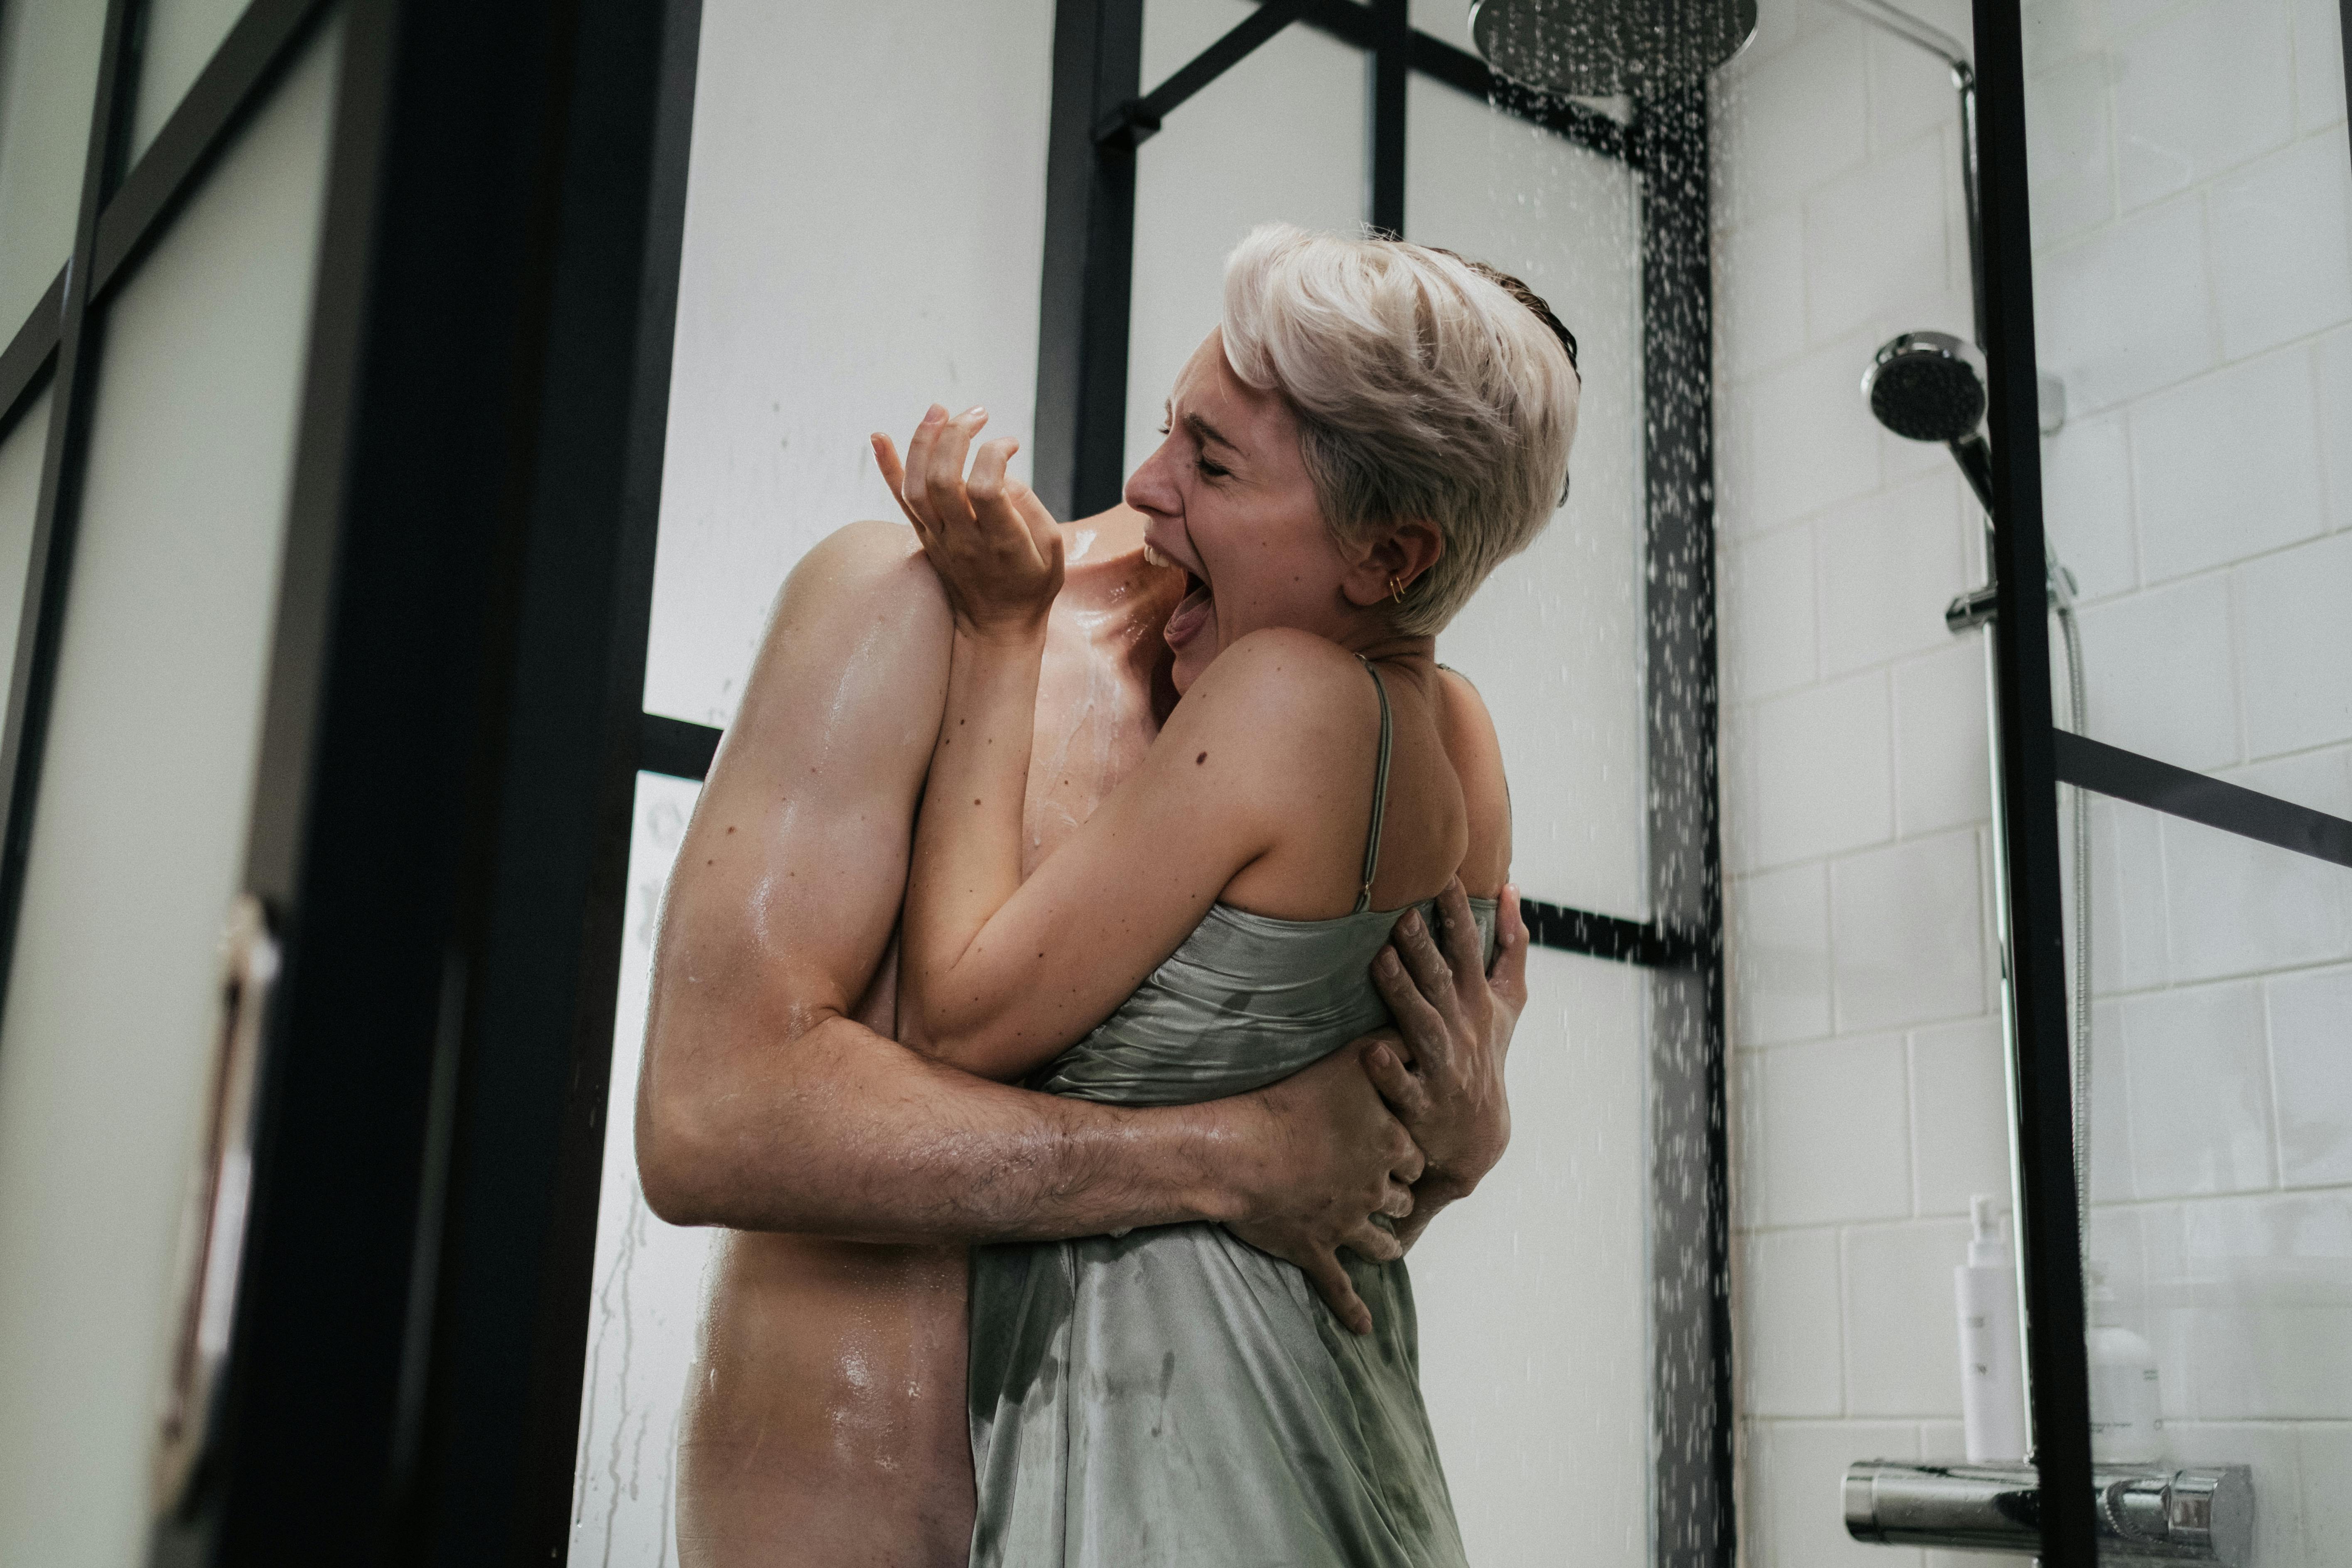 Naked Man Hugging Woman in Green Dress in the Shower · Free Stock Photo